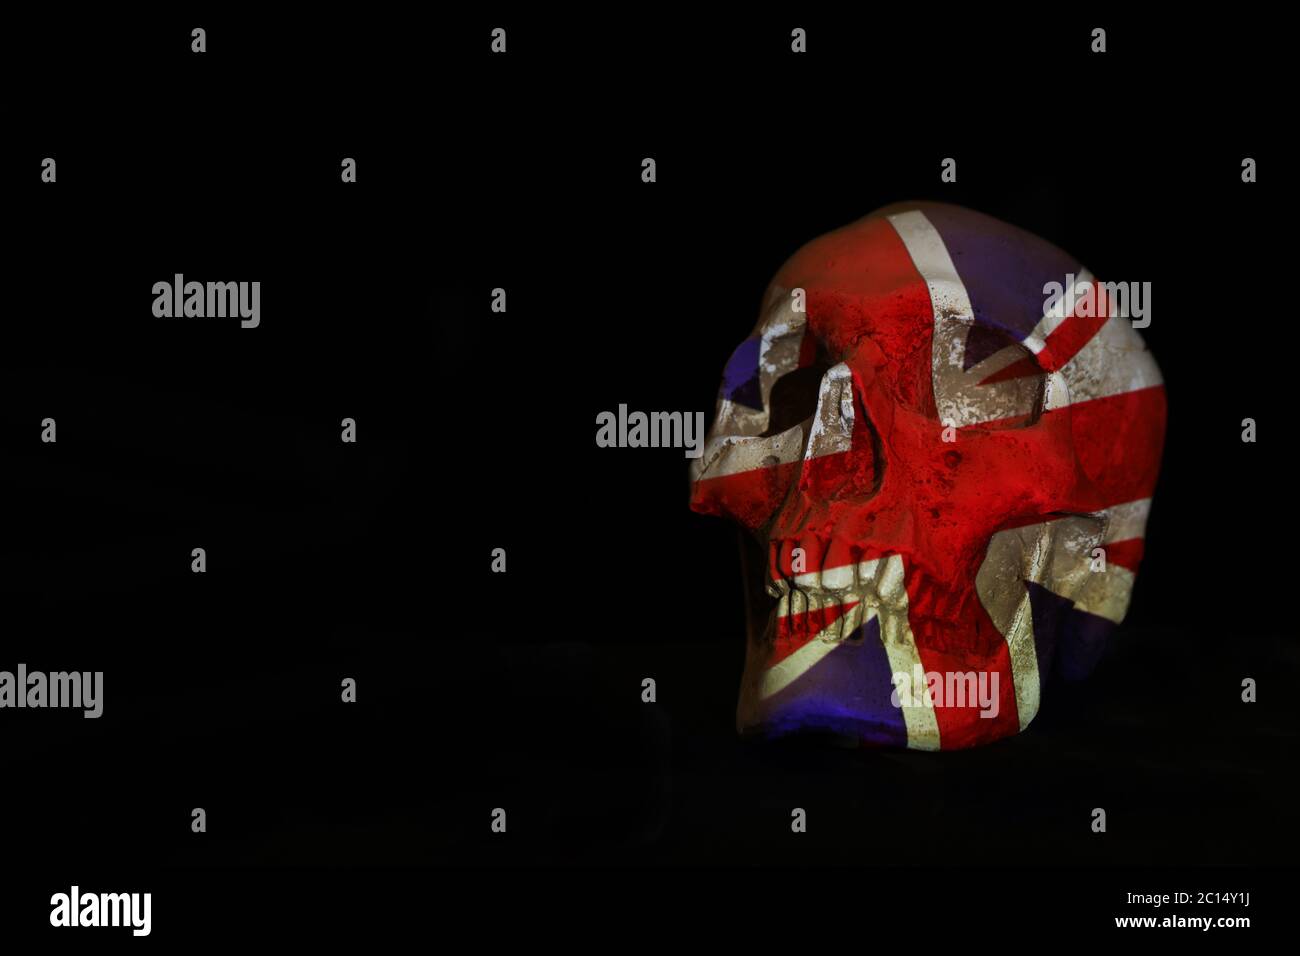 An isolated white skull set against a plain black background with the Union Jack or British flag projected over it. Stock Photo